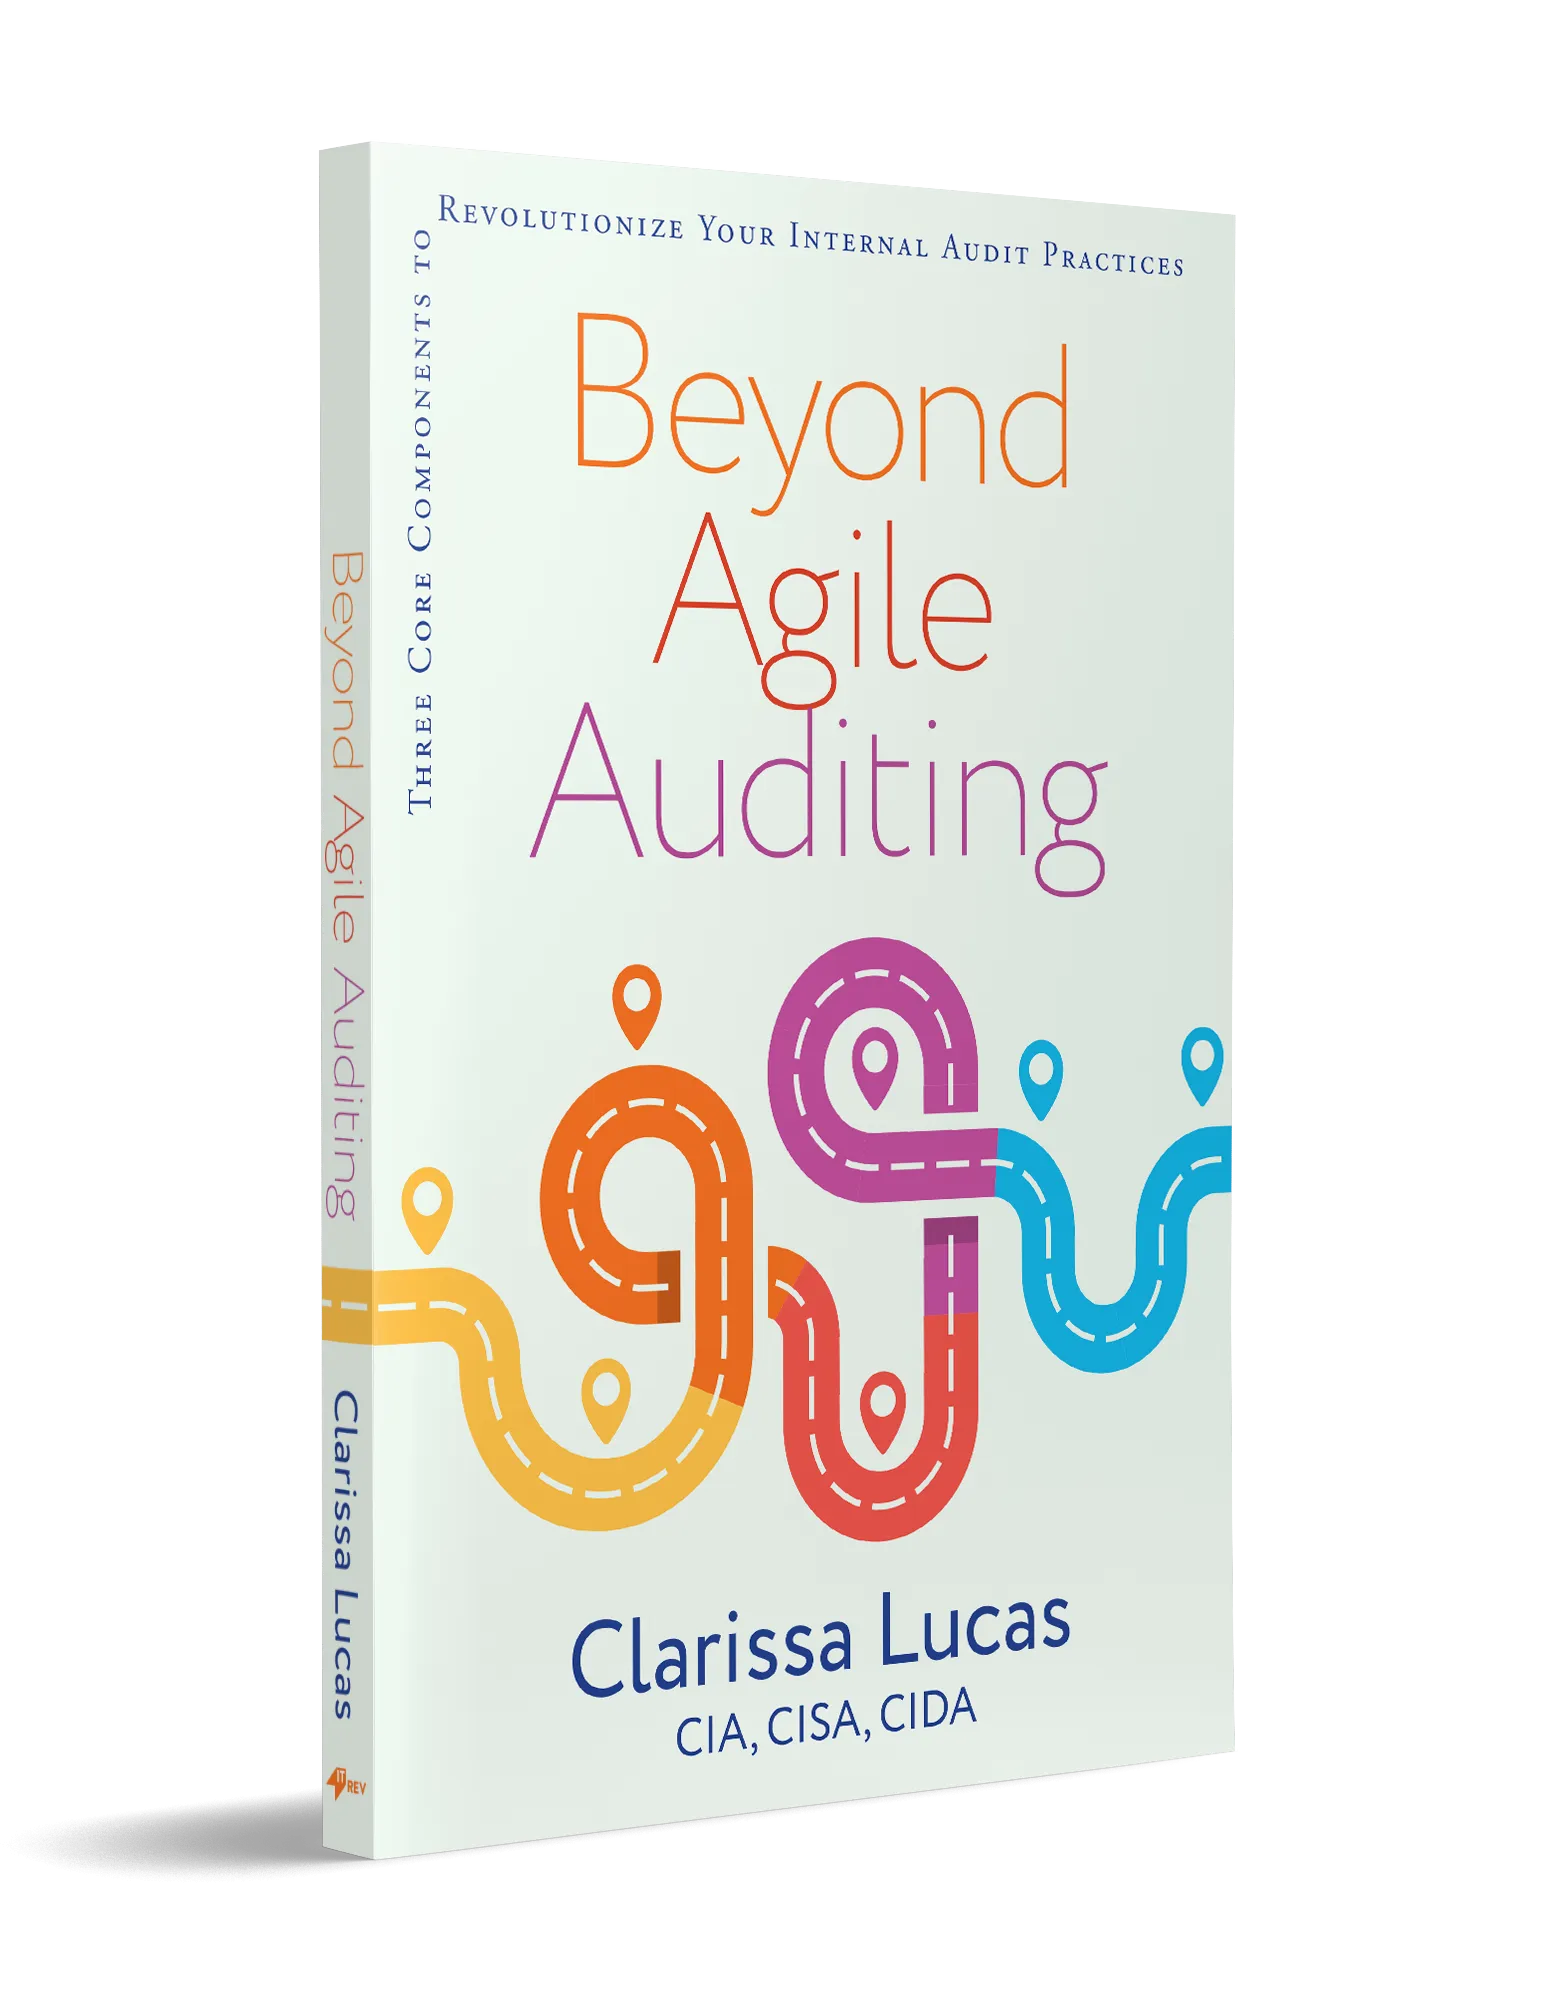 Why Beyond Agile Auditing?